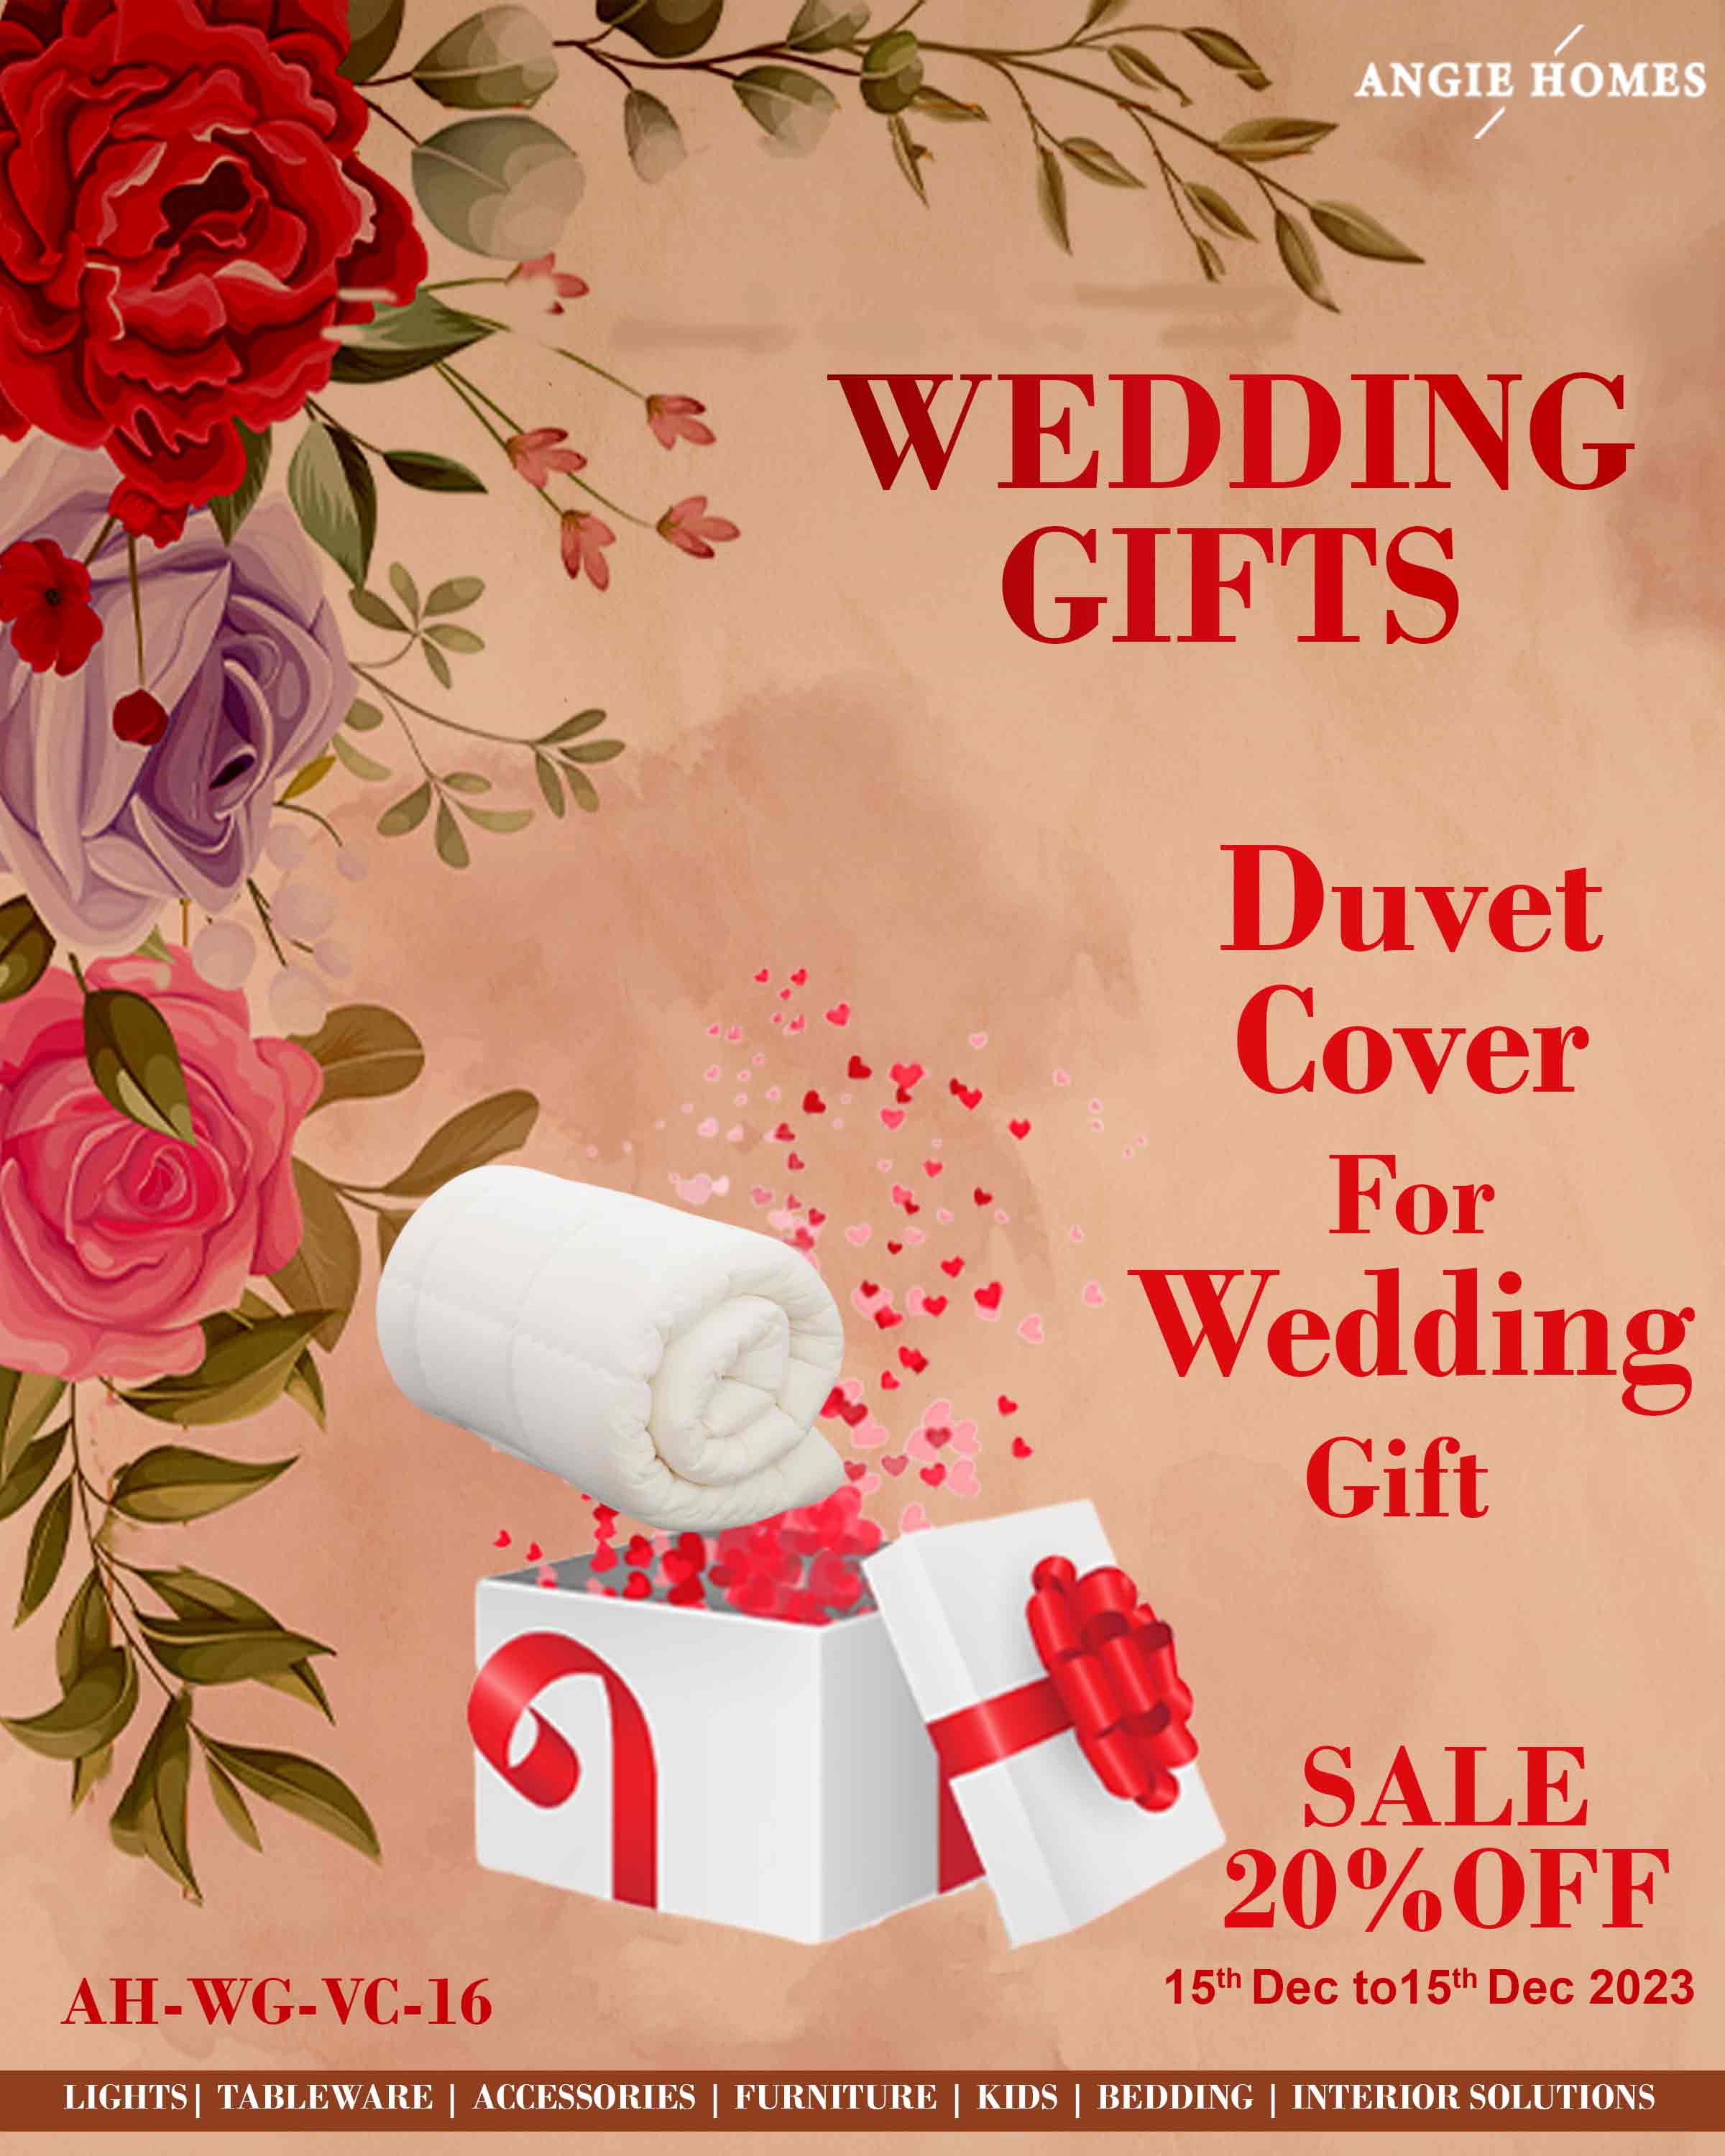 DUVET COVER SET FOR WEDDING GIFTS | MARRIAGE GIFT VOUCHER | GIFTTING CARD COUPLES ANGIE HOMES